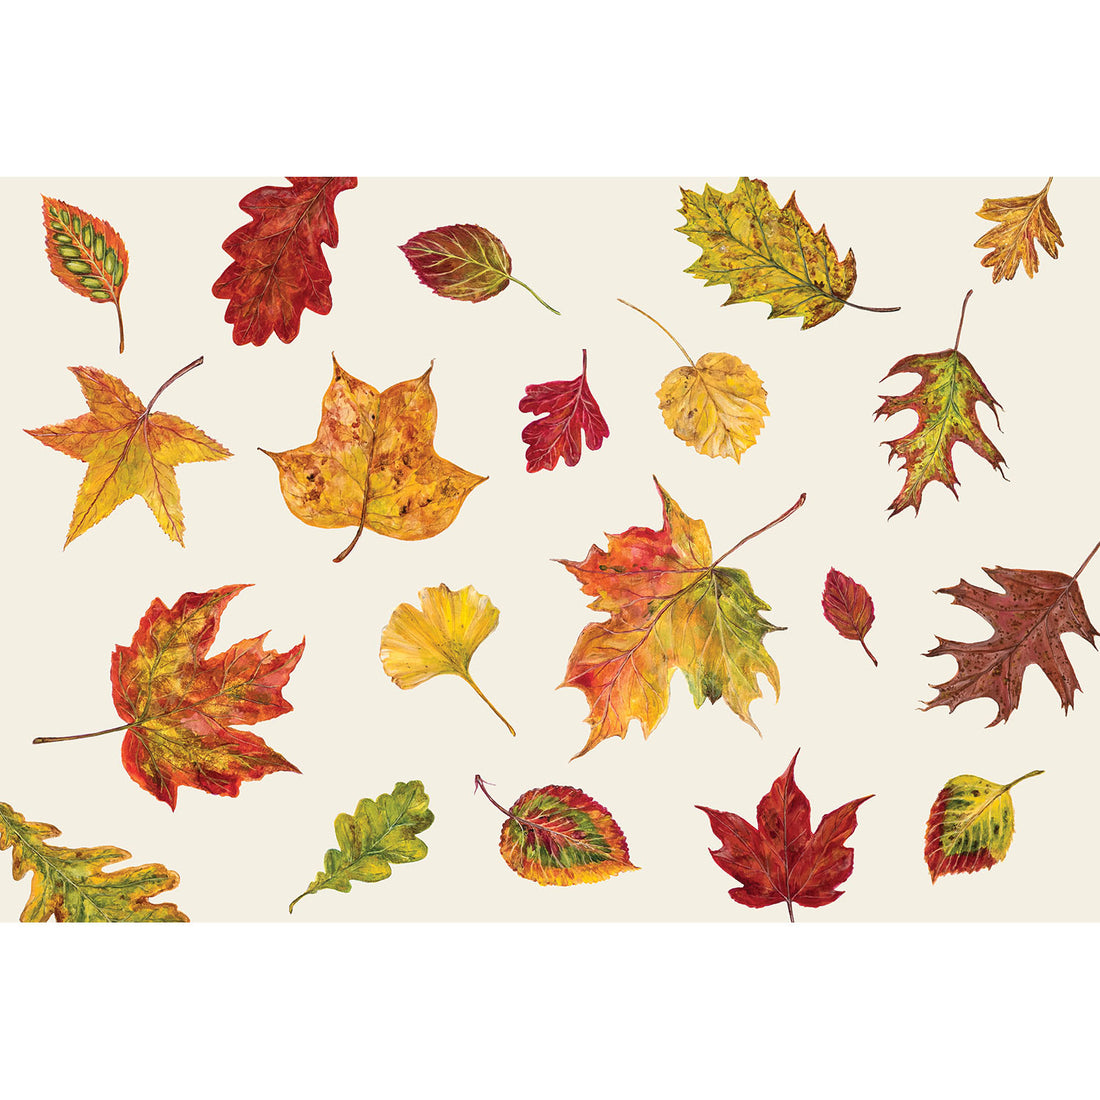 An illustration of varied, colorful fall leaves in yellow, orange, red and green scattered on a white background.